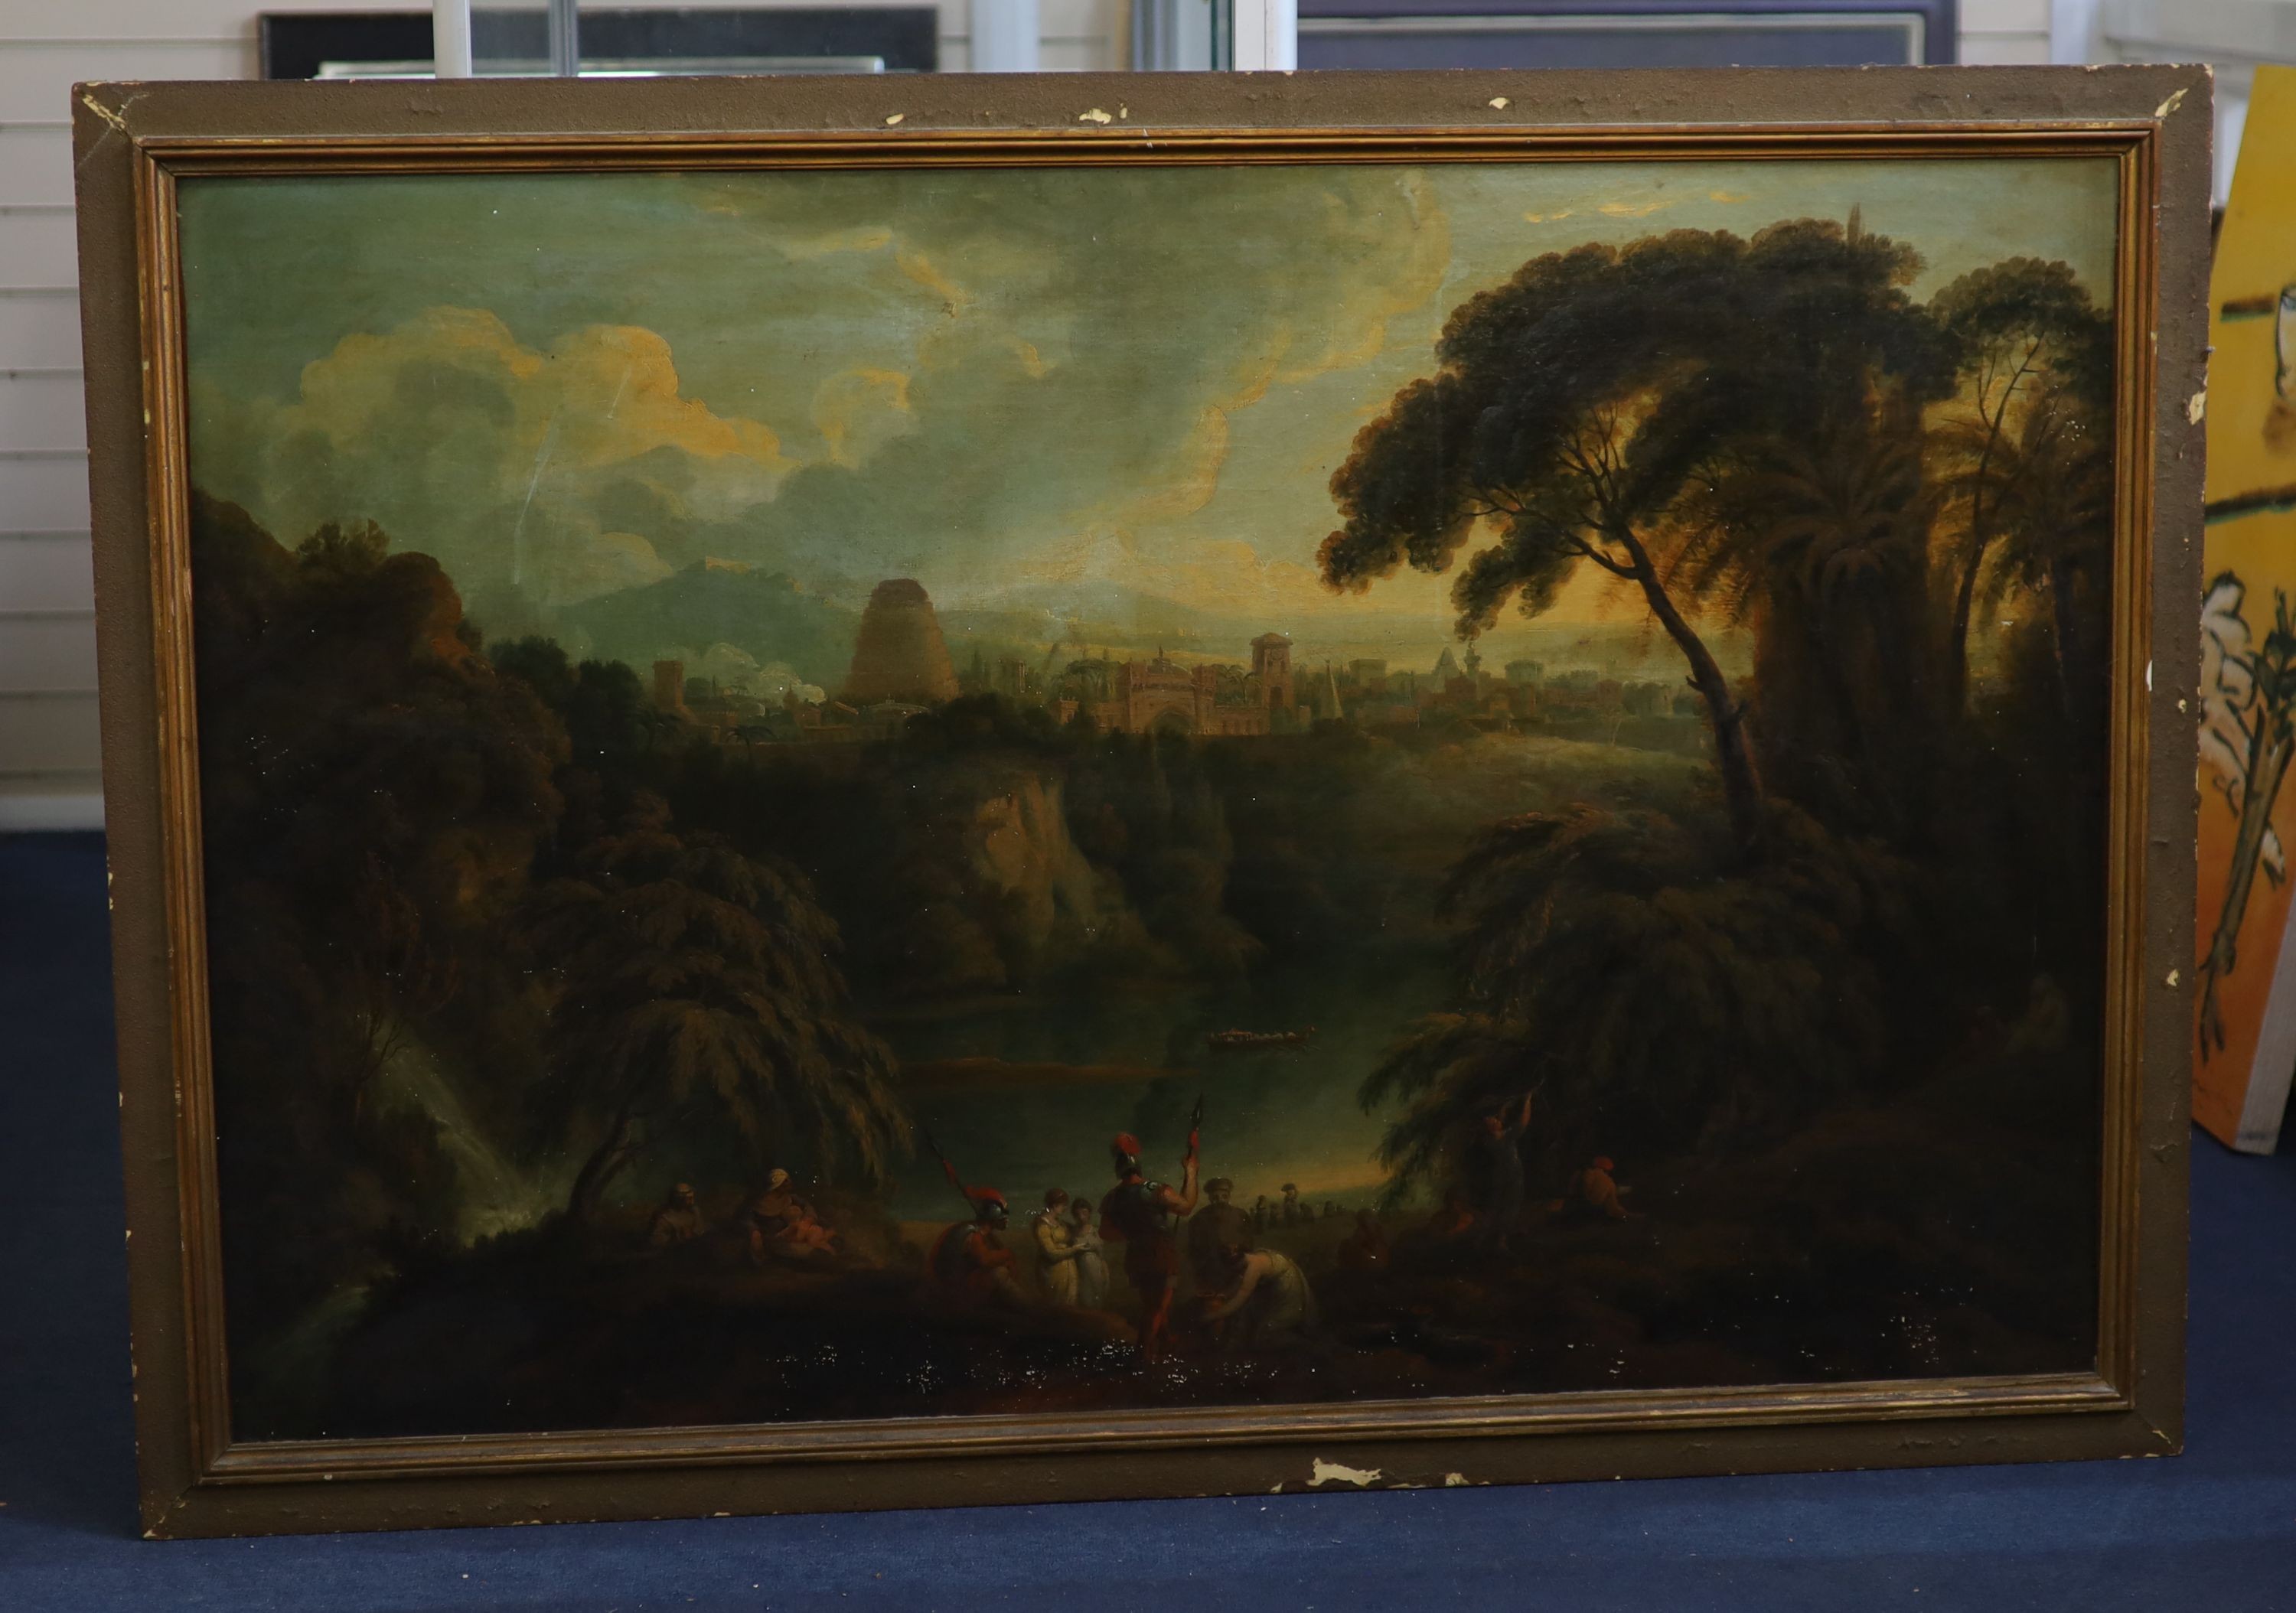 J. Janvers (18/19th C), Italianate landscape with Roman figures in the foreground and a city beyond, Oil on canvas, 90 x 136cm.